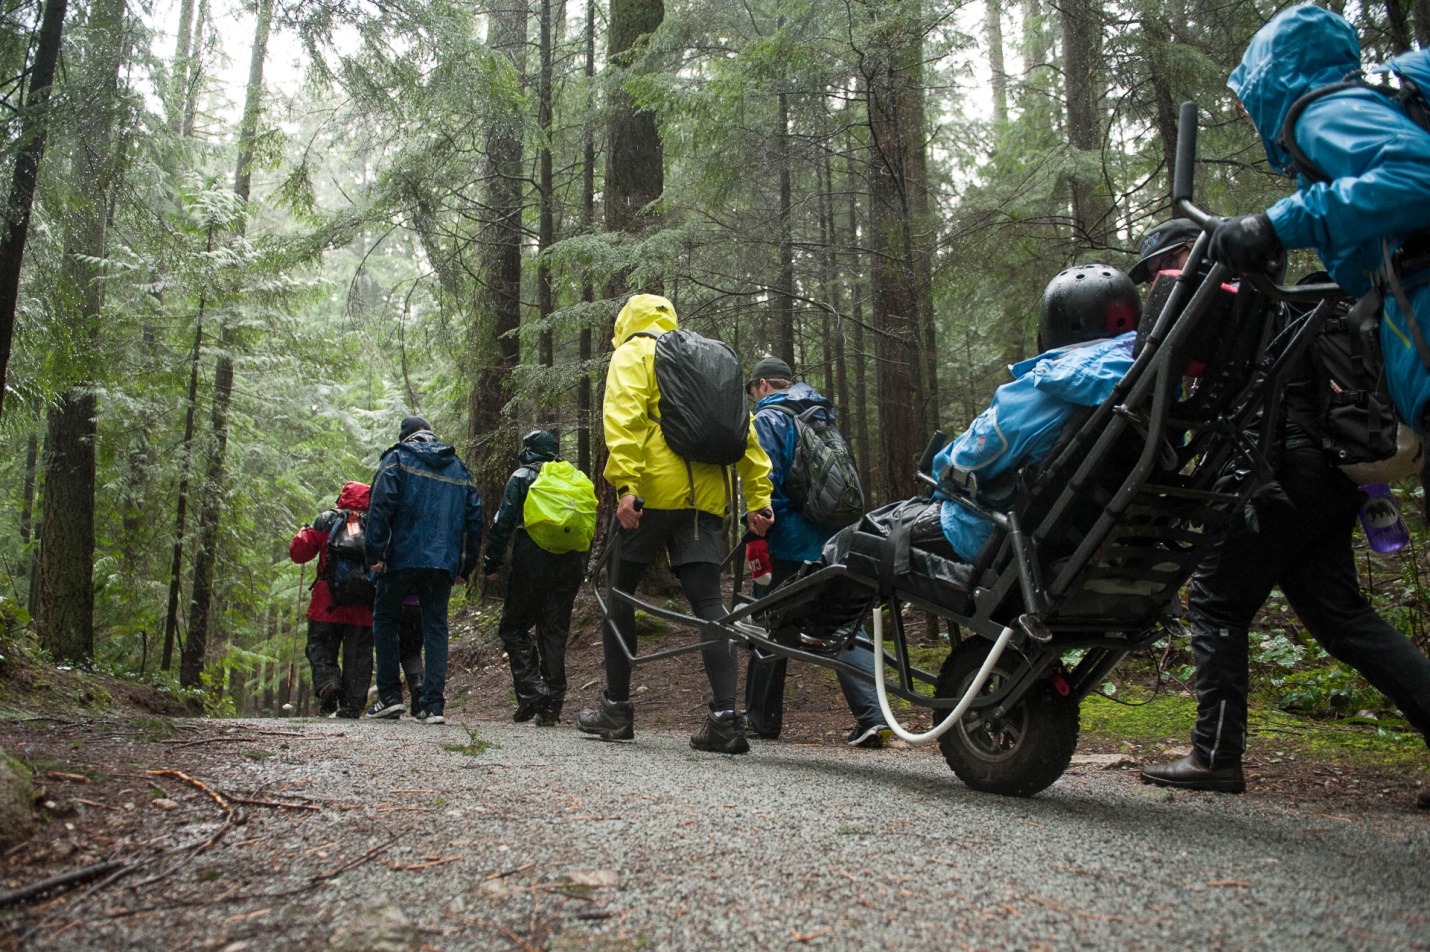 A group of people on a gravel hiking trail, with one person seated in a single-wheeled vehicle pulled by one hiker and steadied from behind by another